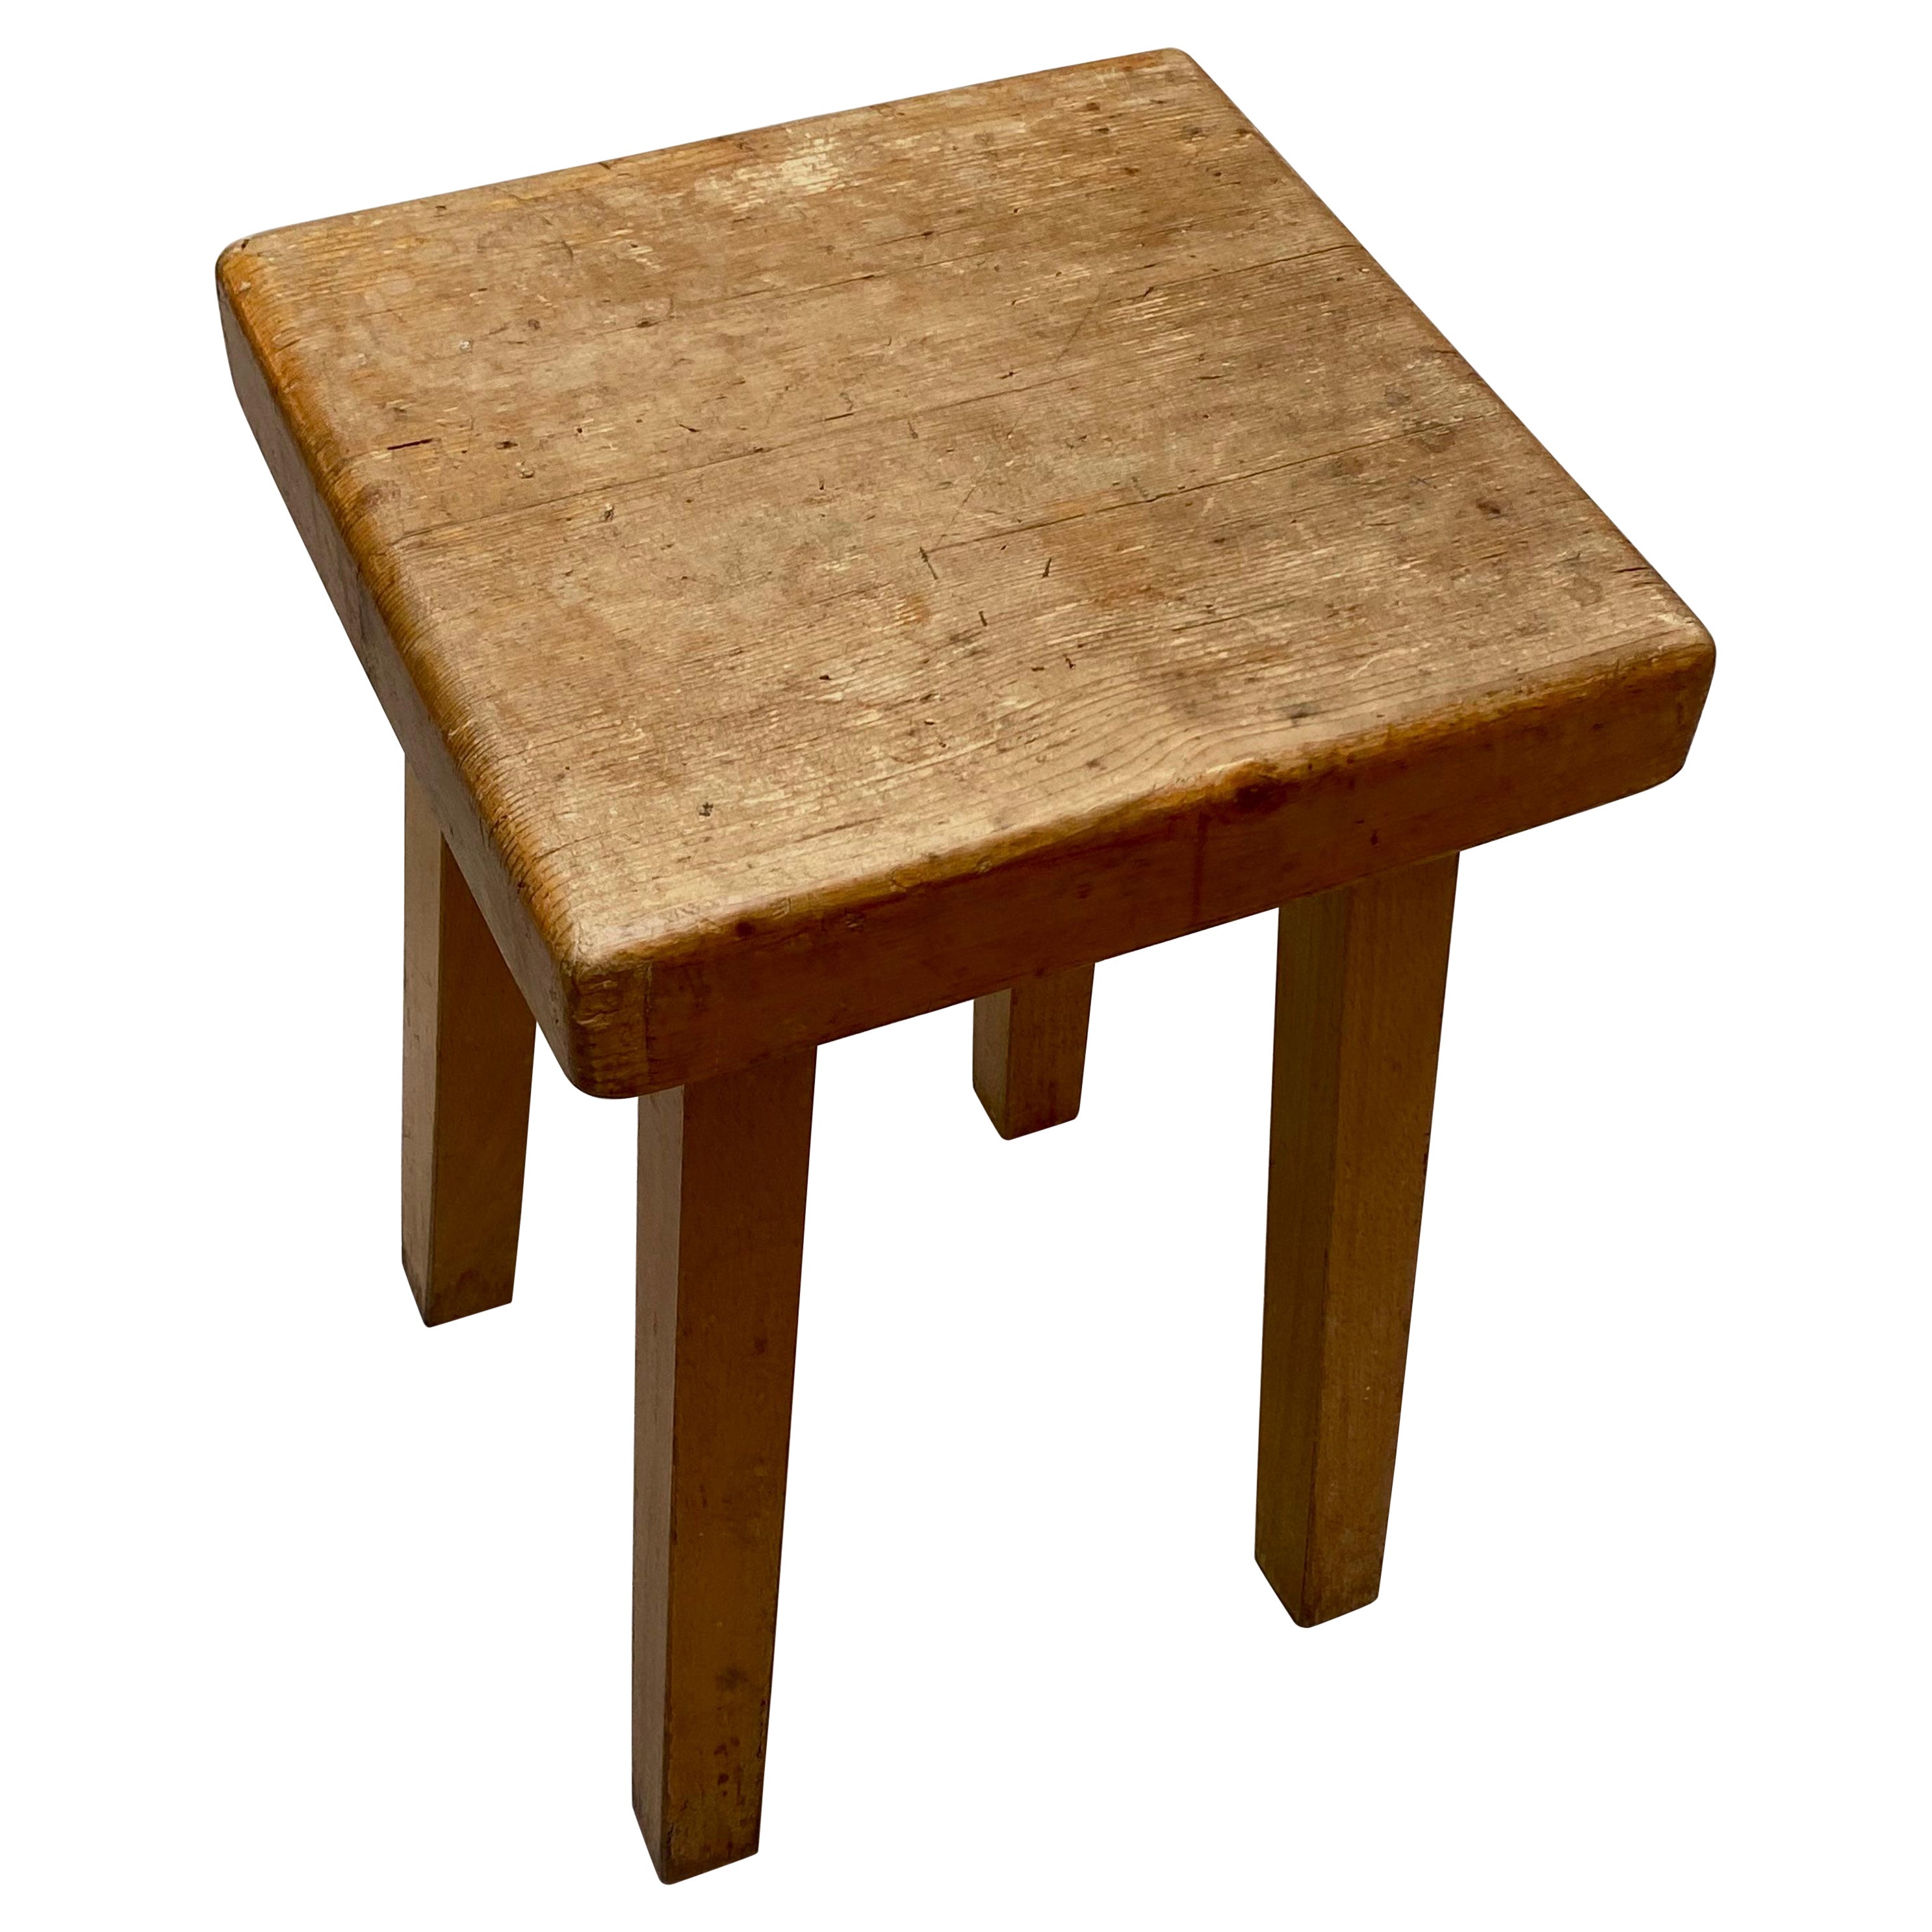 Perriand Pine Wood Stool by Charlotte Perriand for Les Arcs, 1800 For Sale